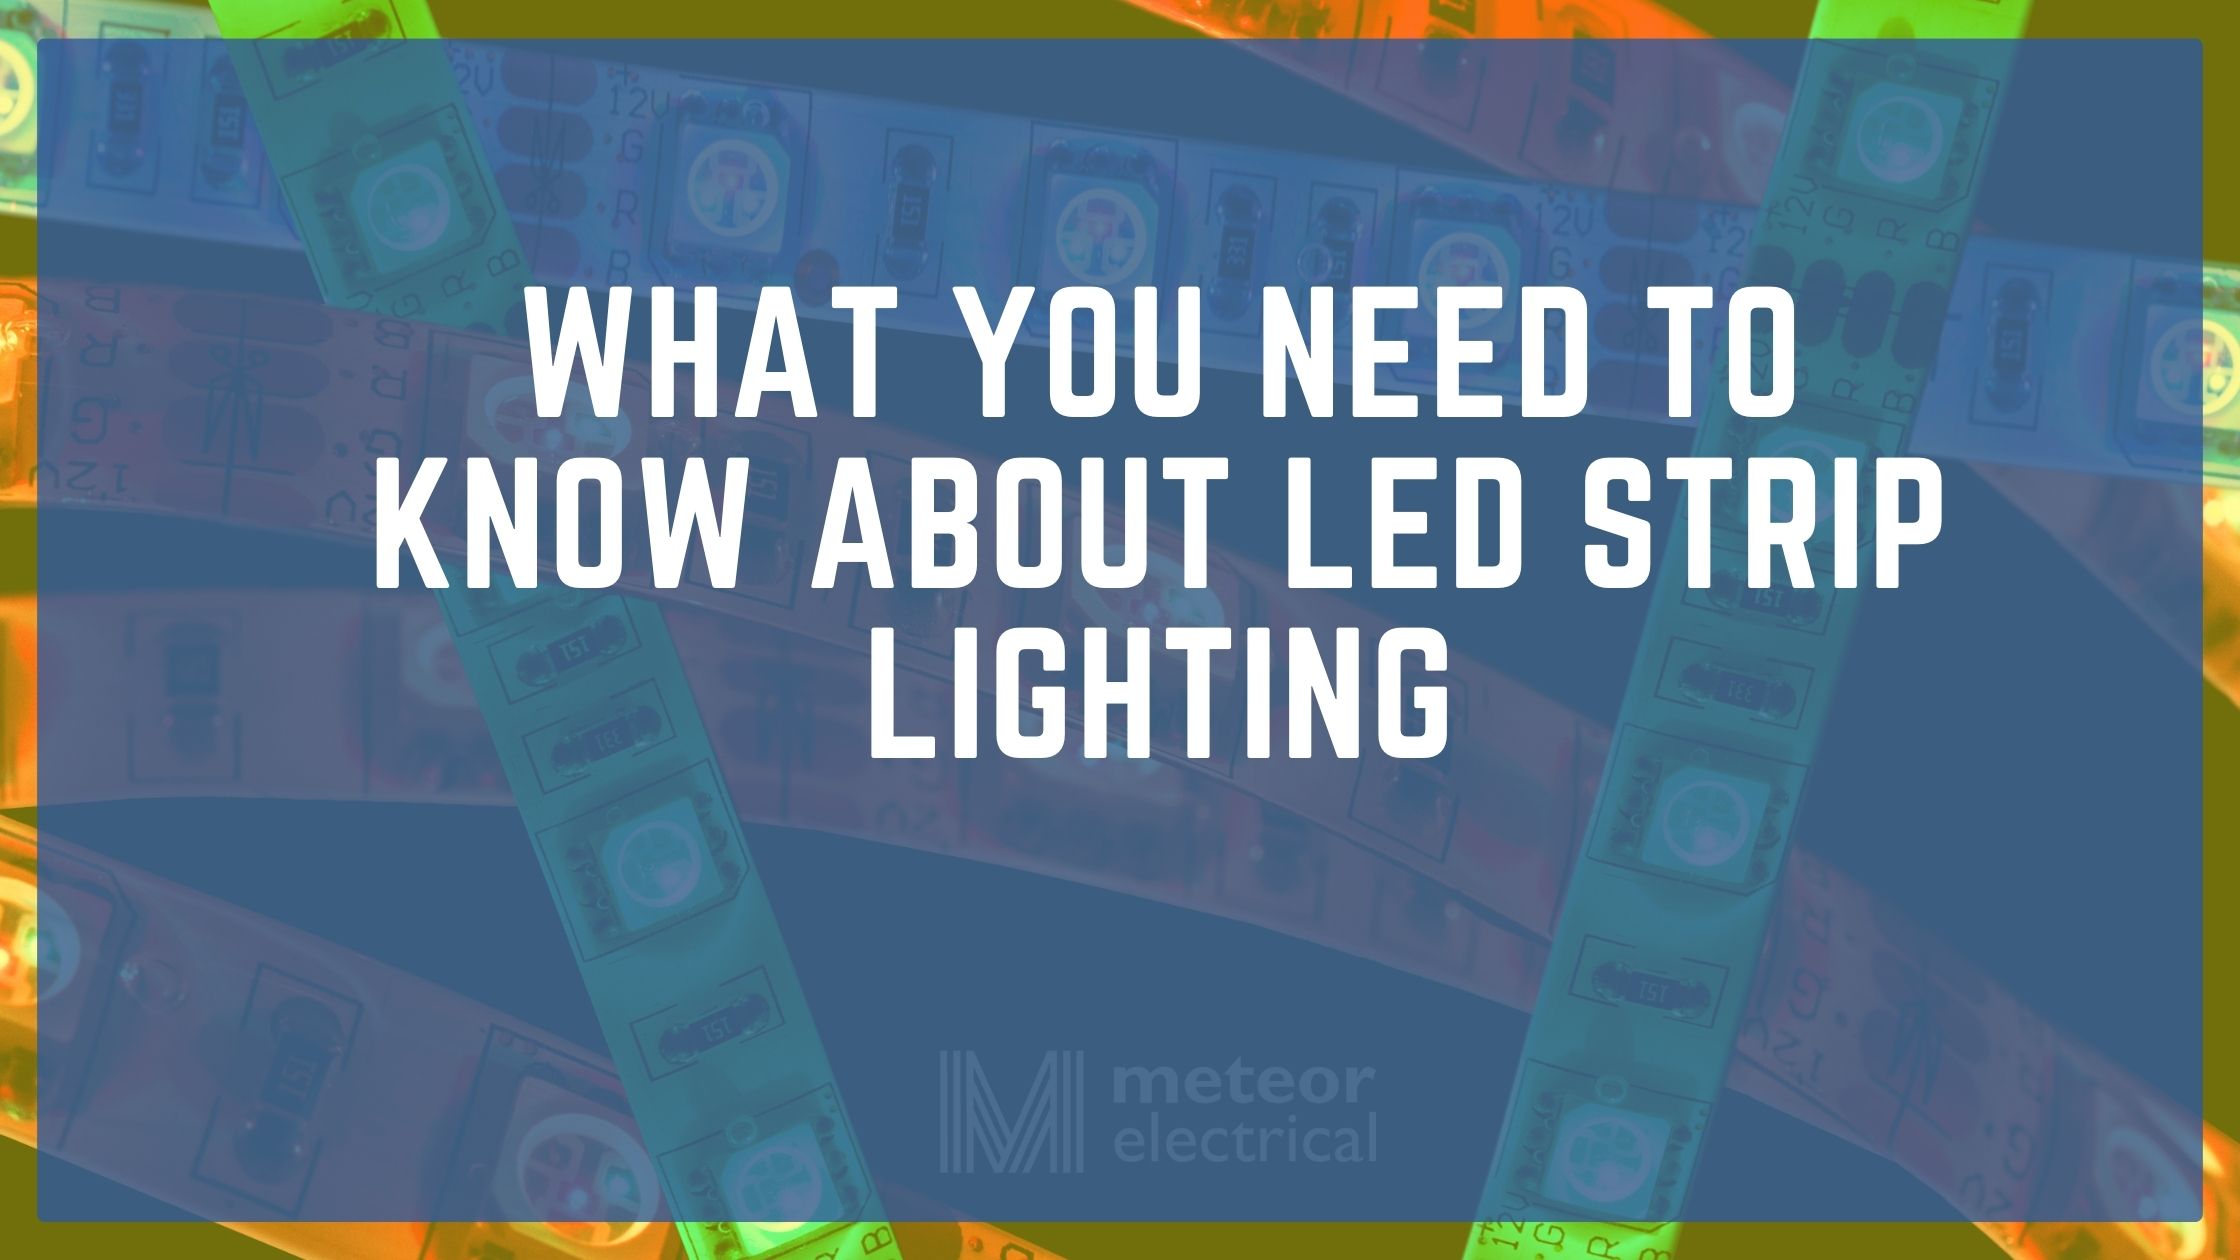 All you need to know about LED Strip Lighting